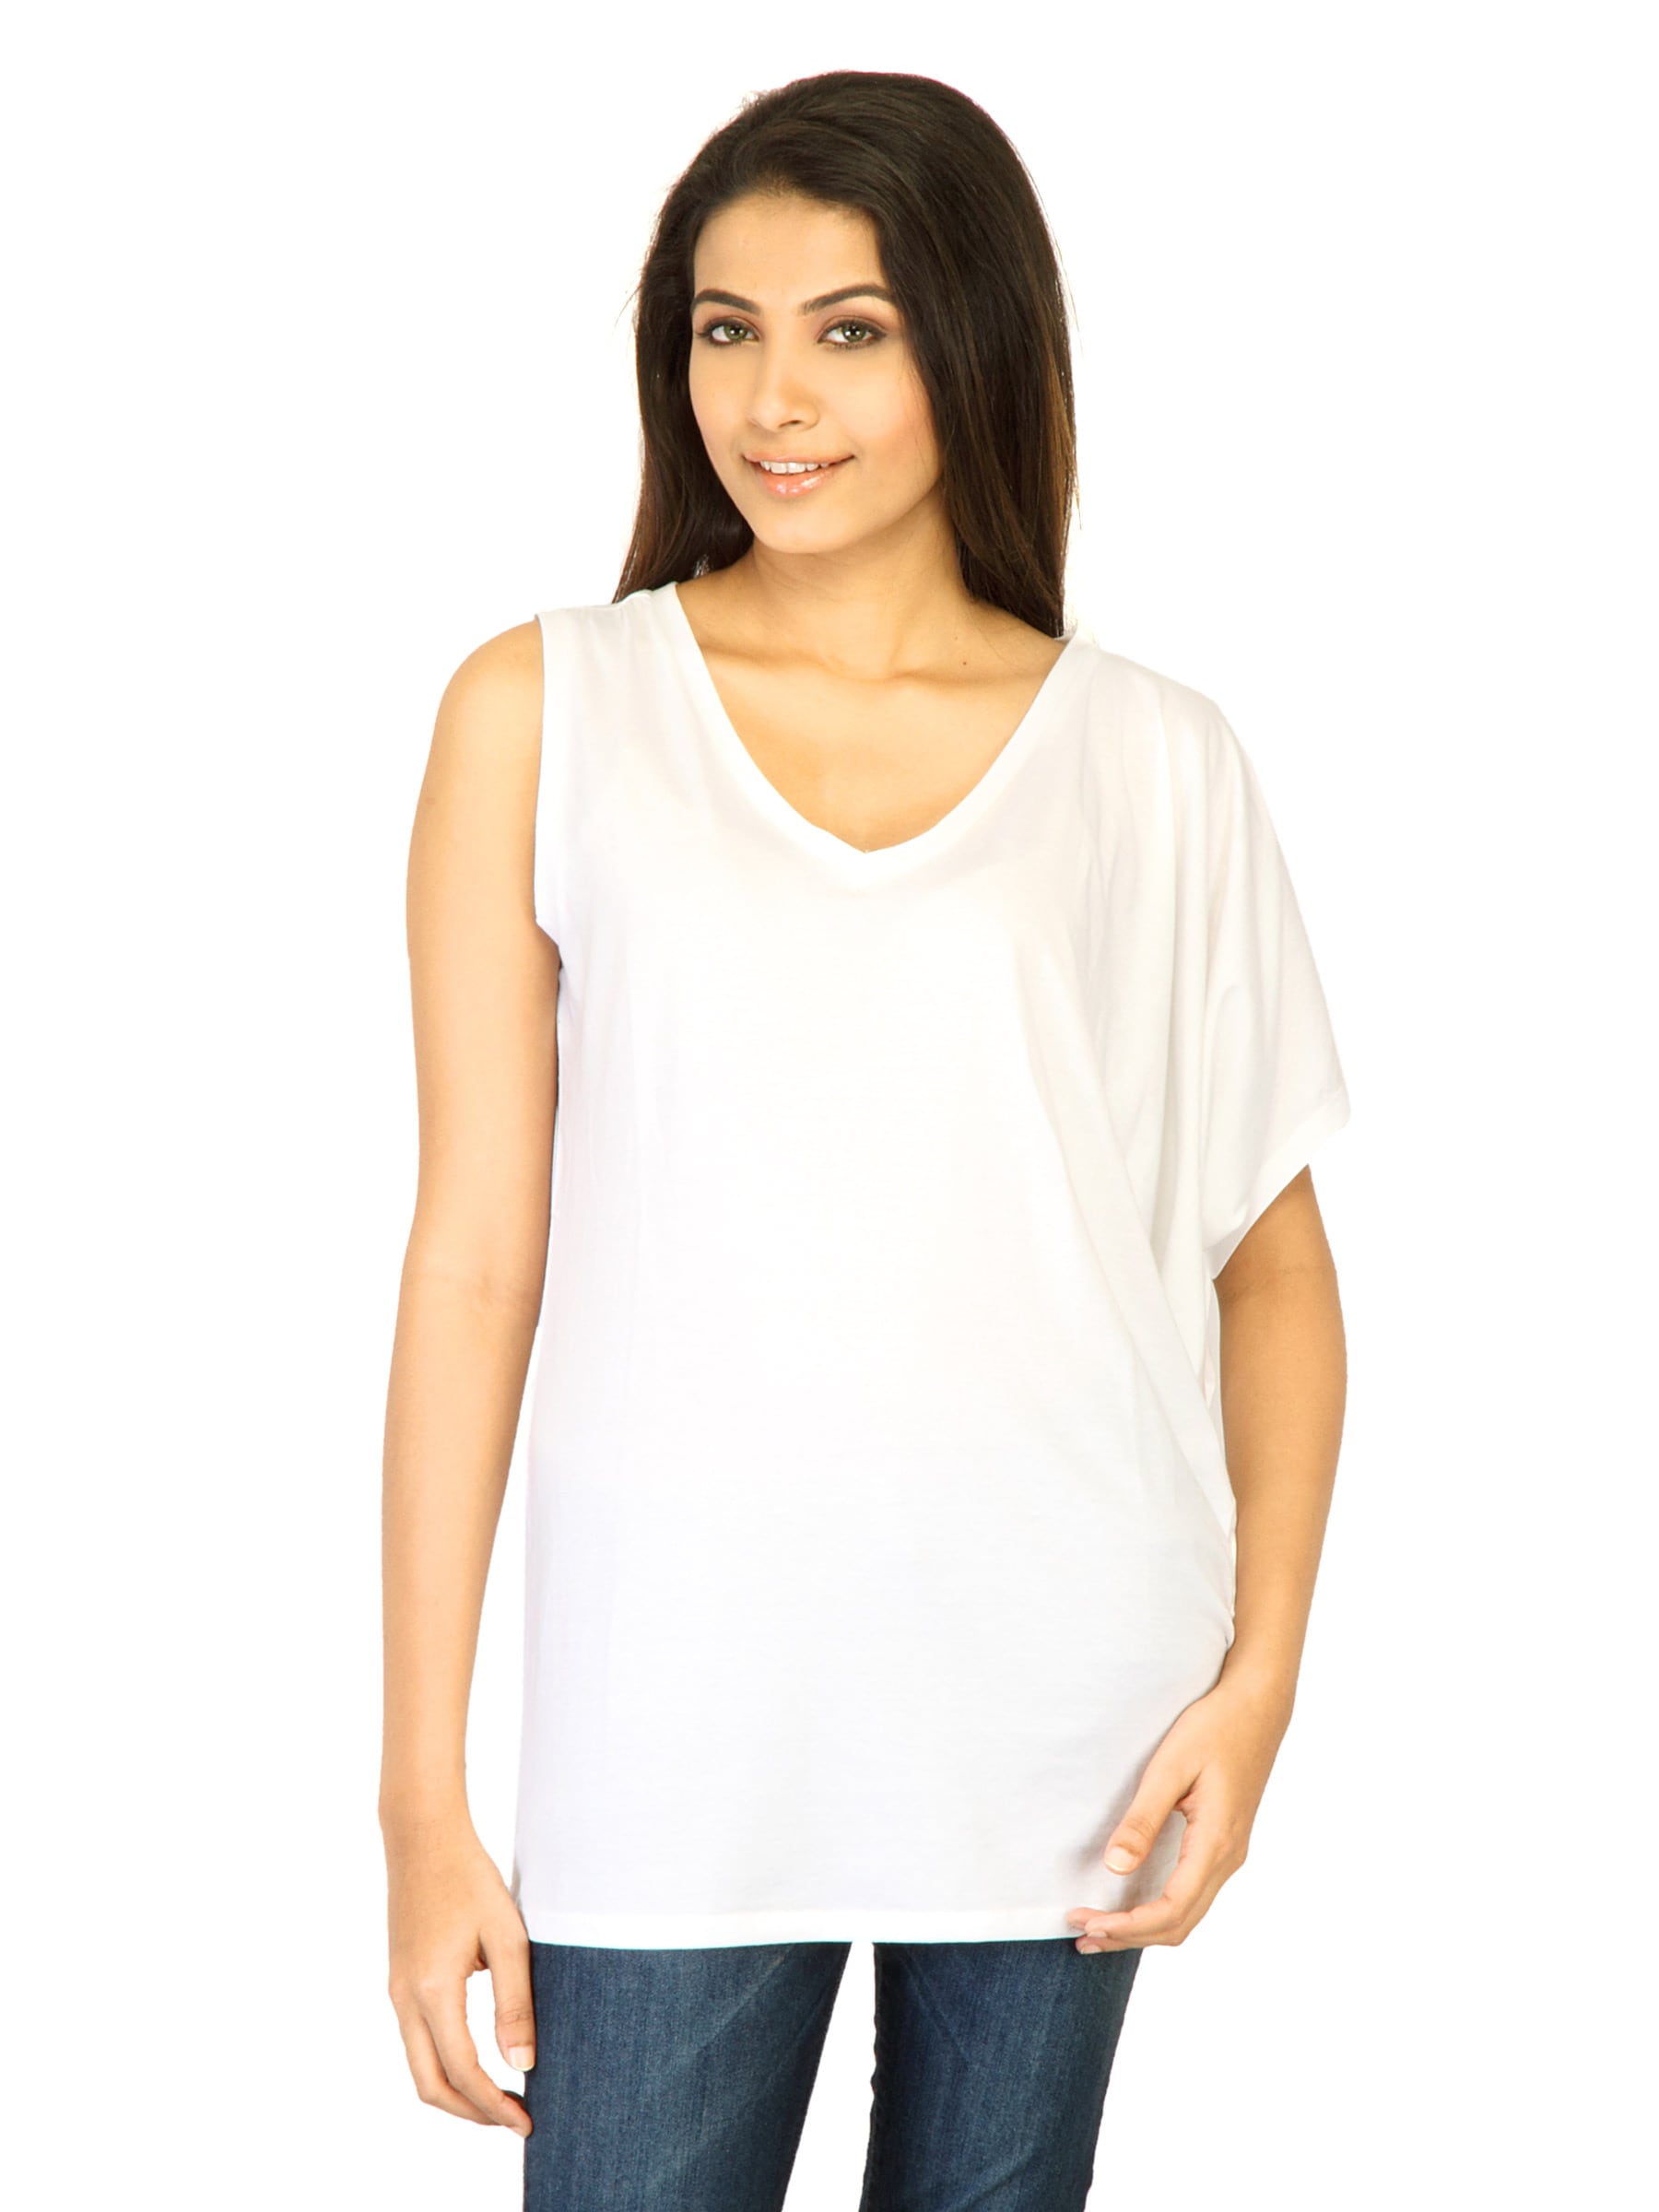 United Colors of Benetton Women Solid White Tops